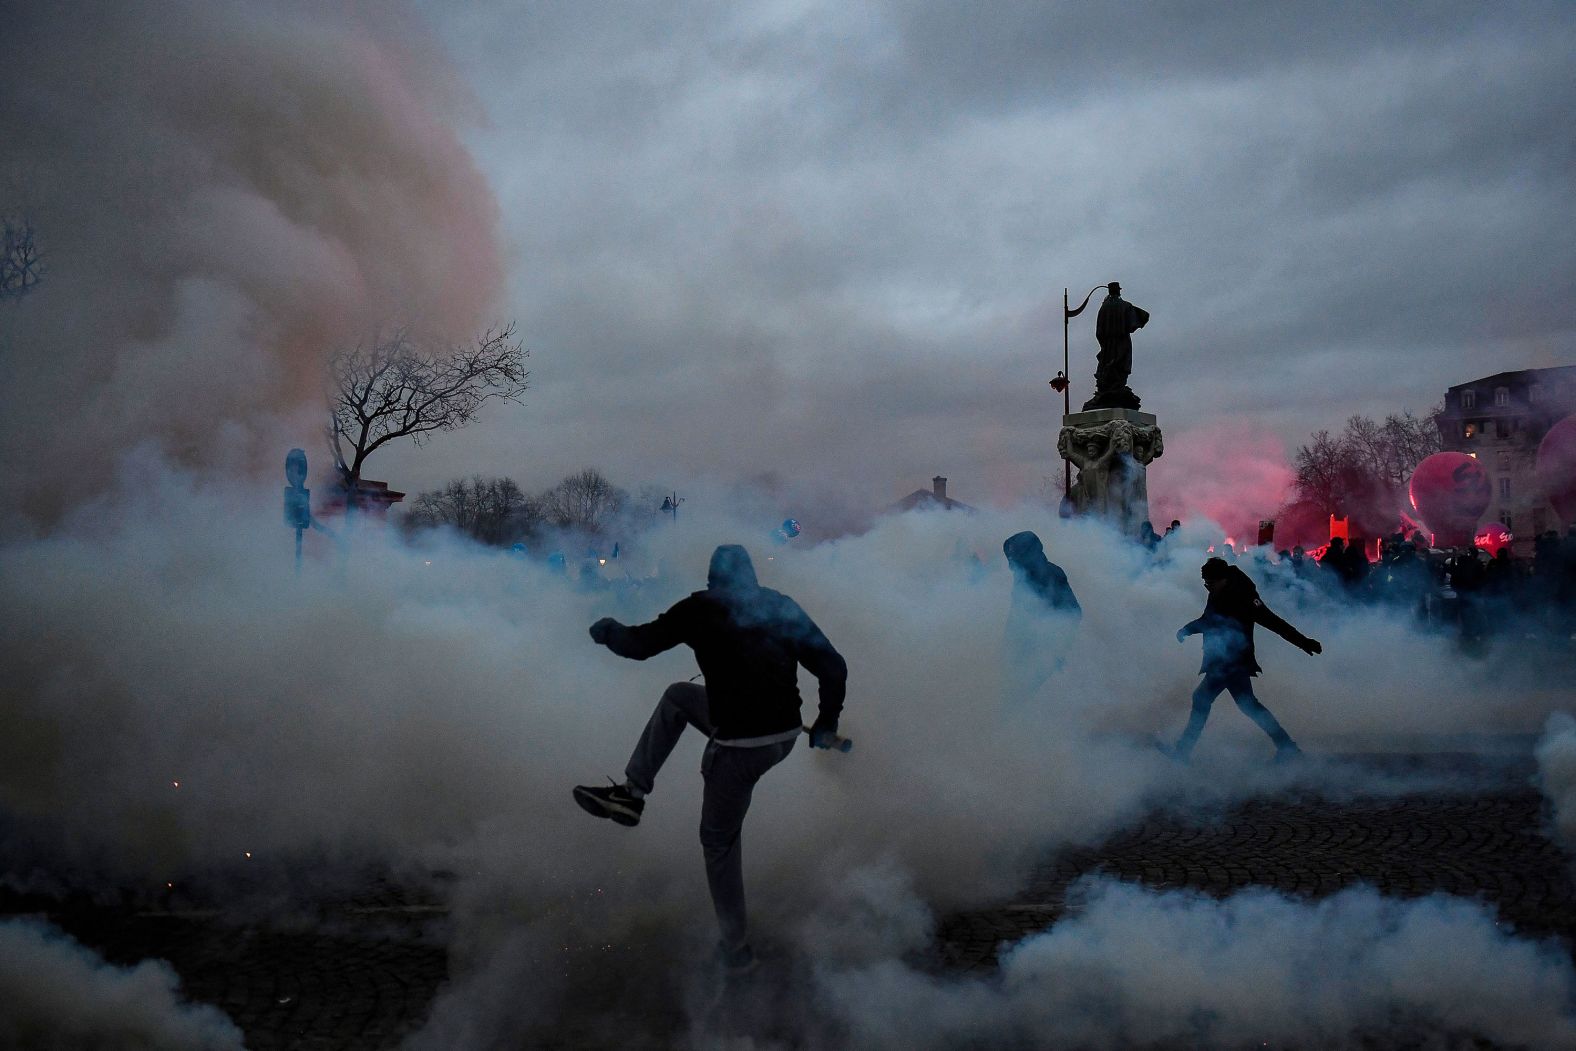 A protester kicks a tear gas canister during clashes with police in Paris on Tuesday, January 31. <a href="index.php?page=&url=https%3A%2F%2Fwww.cnn.com%2F2023%2F01%2F31%2Fbusiness%2Ffrance-strikes-pensions%2Findex.html" target="_blank">Unions staged another mass strike</a> against government plans to raise the retirement age for most workers. French schools and transportation networks were heavily disrupted.